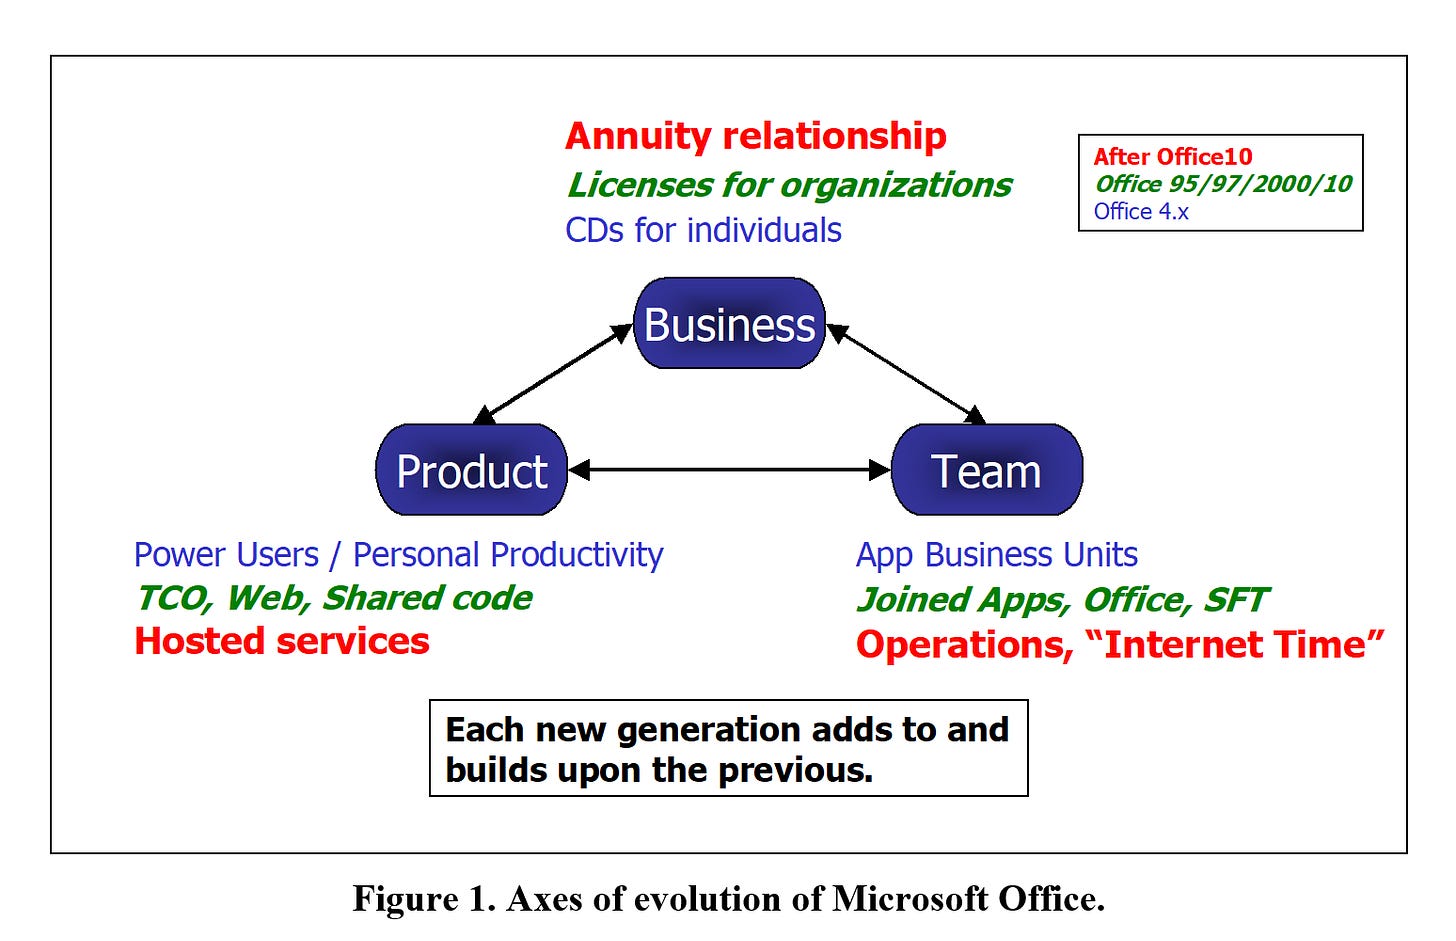 Diagram showing the evolution of Office across three legs of a triangle: Product (power users/productivity, TCO/Web/Shared code, Hosted Services) to Team (App Business Units, Joined Apps/Shared Feature Teams, Operations Internet Time), and Business (CDs for individuals, licenses for orgs, Annuity relationship). Each generation adds to and builds on the previous.